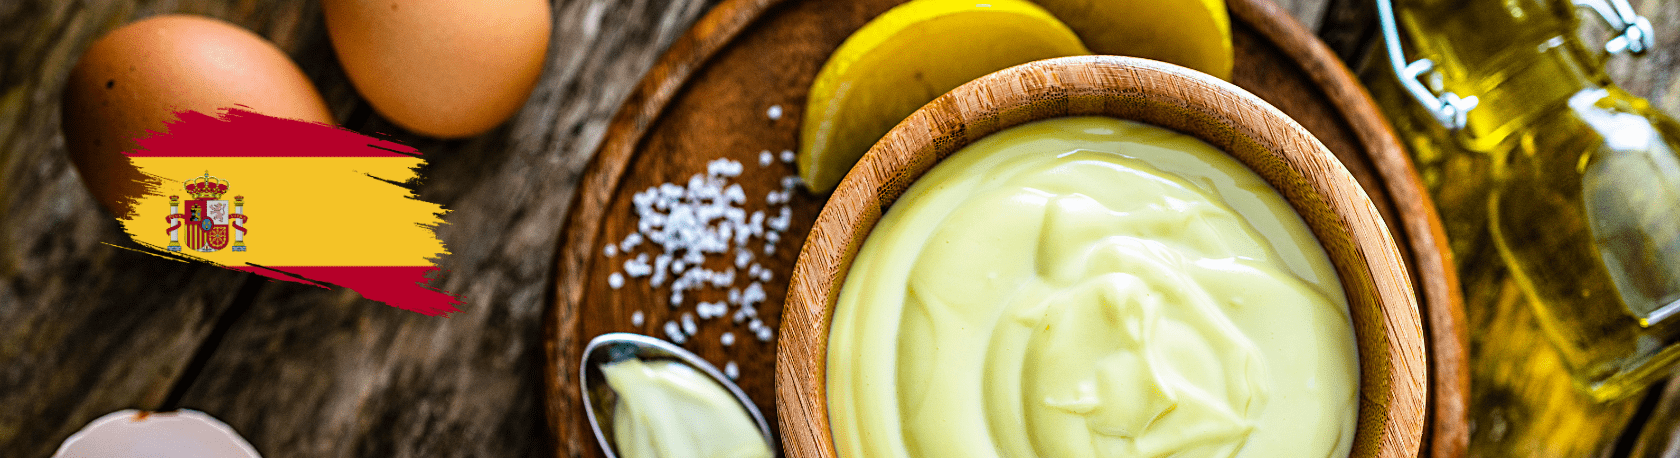 Improve your Spanish vocabulary while learning about mayonnaise’s Spanish roots